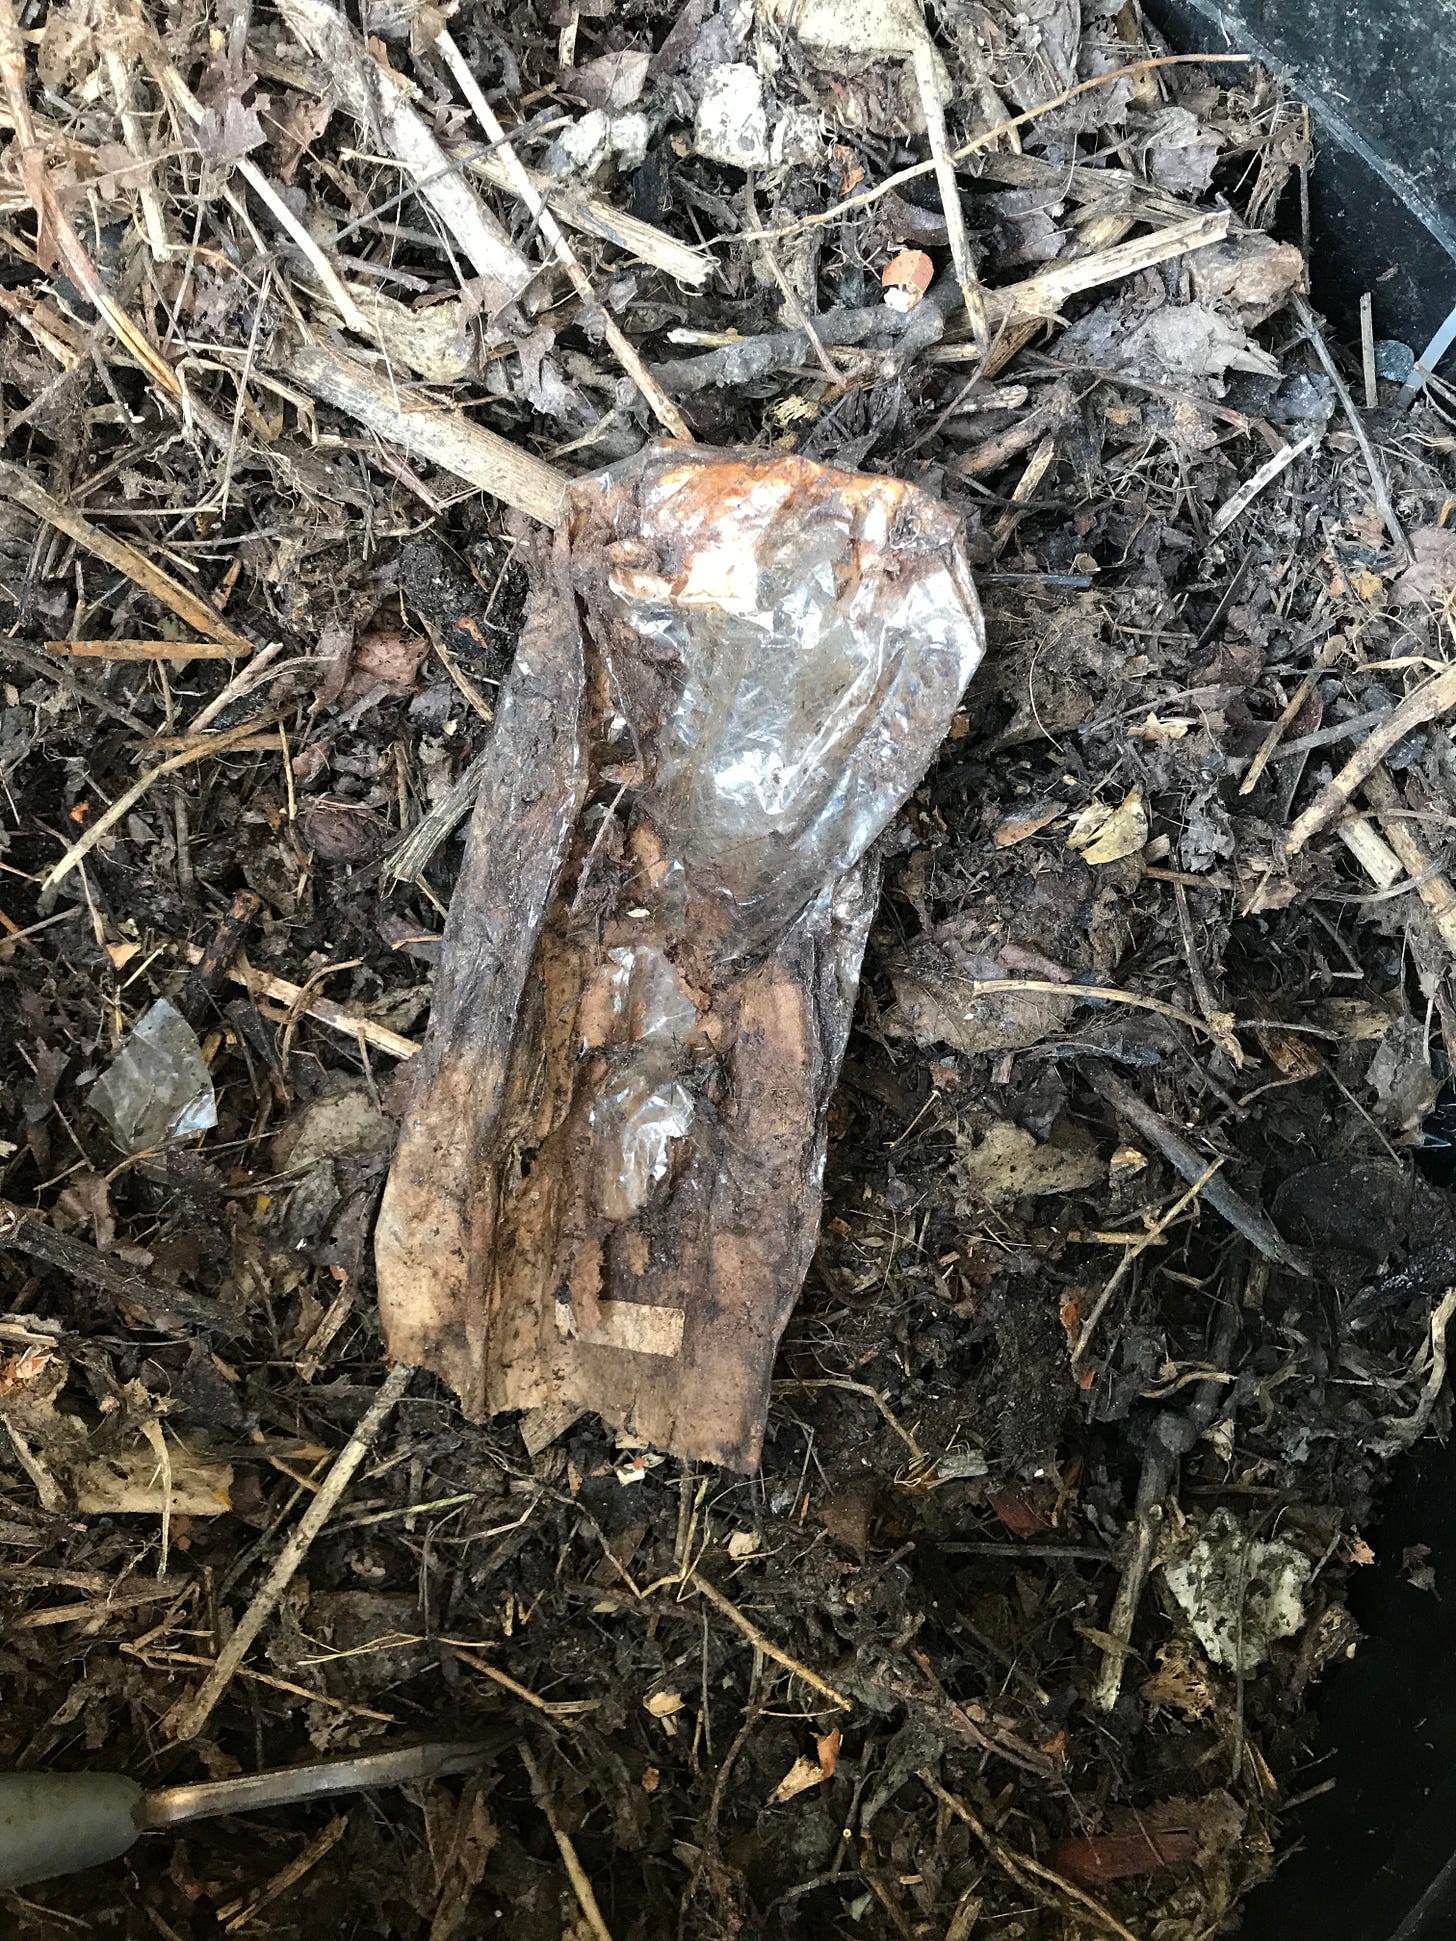 A plastic bag sitting on a compost pile